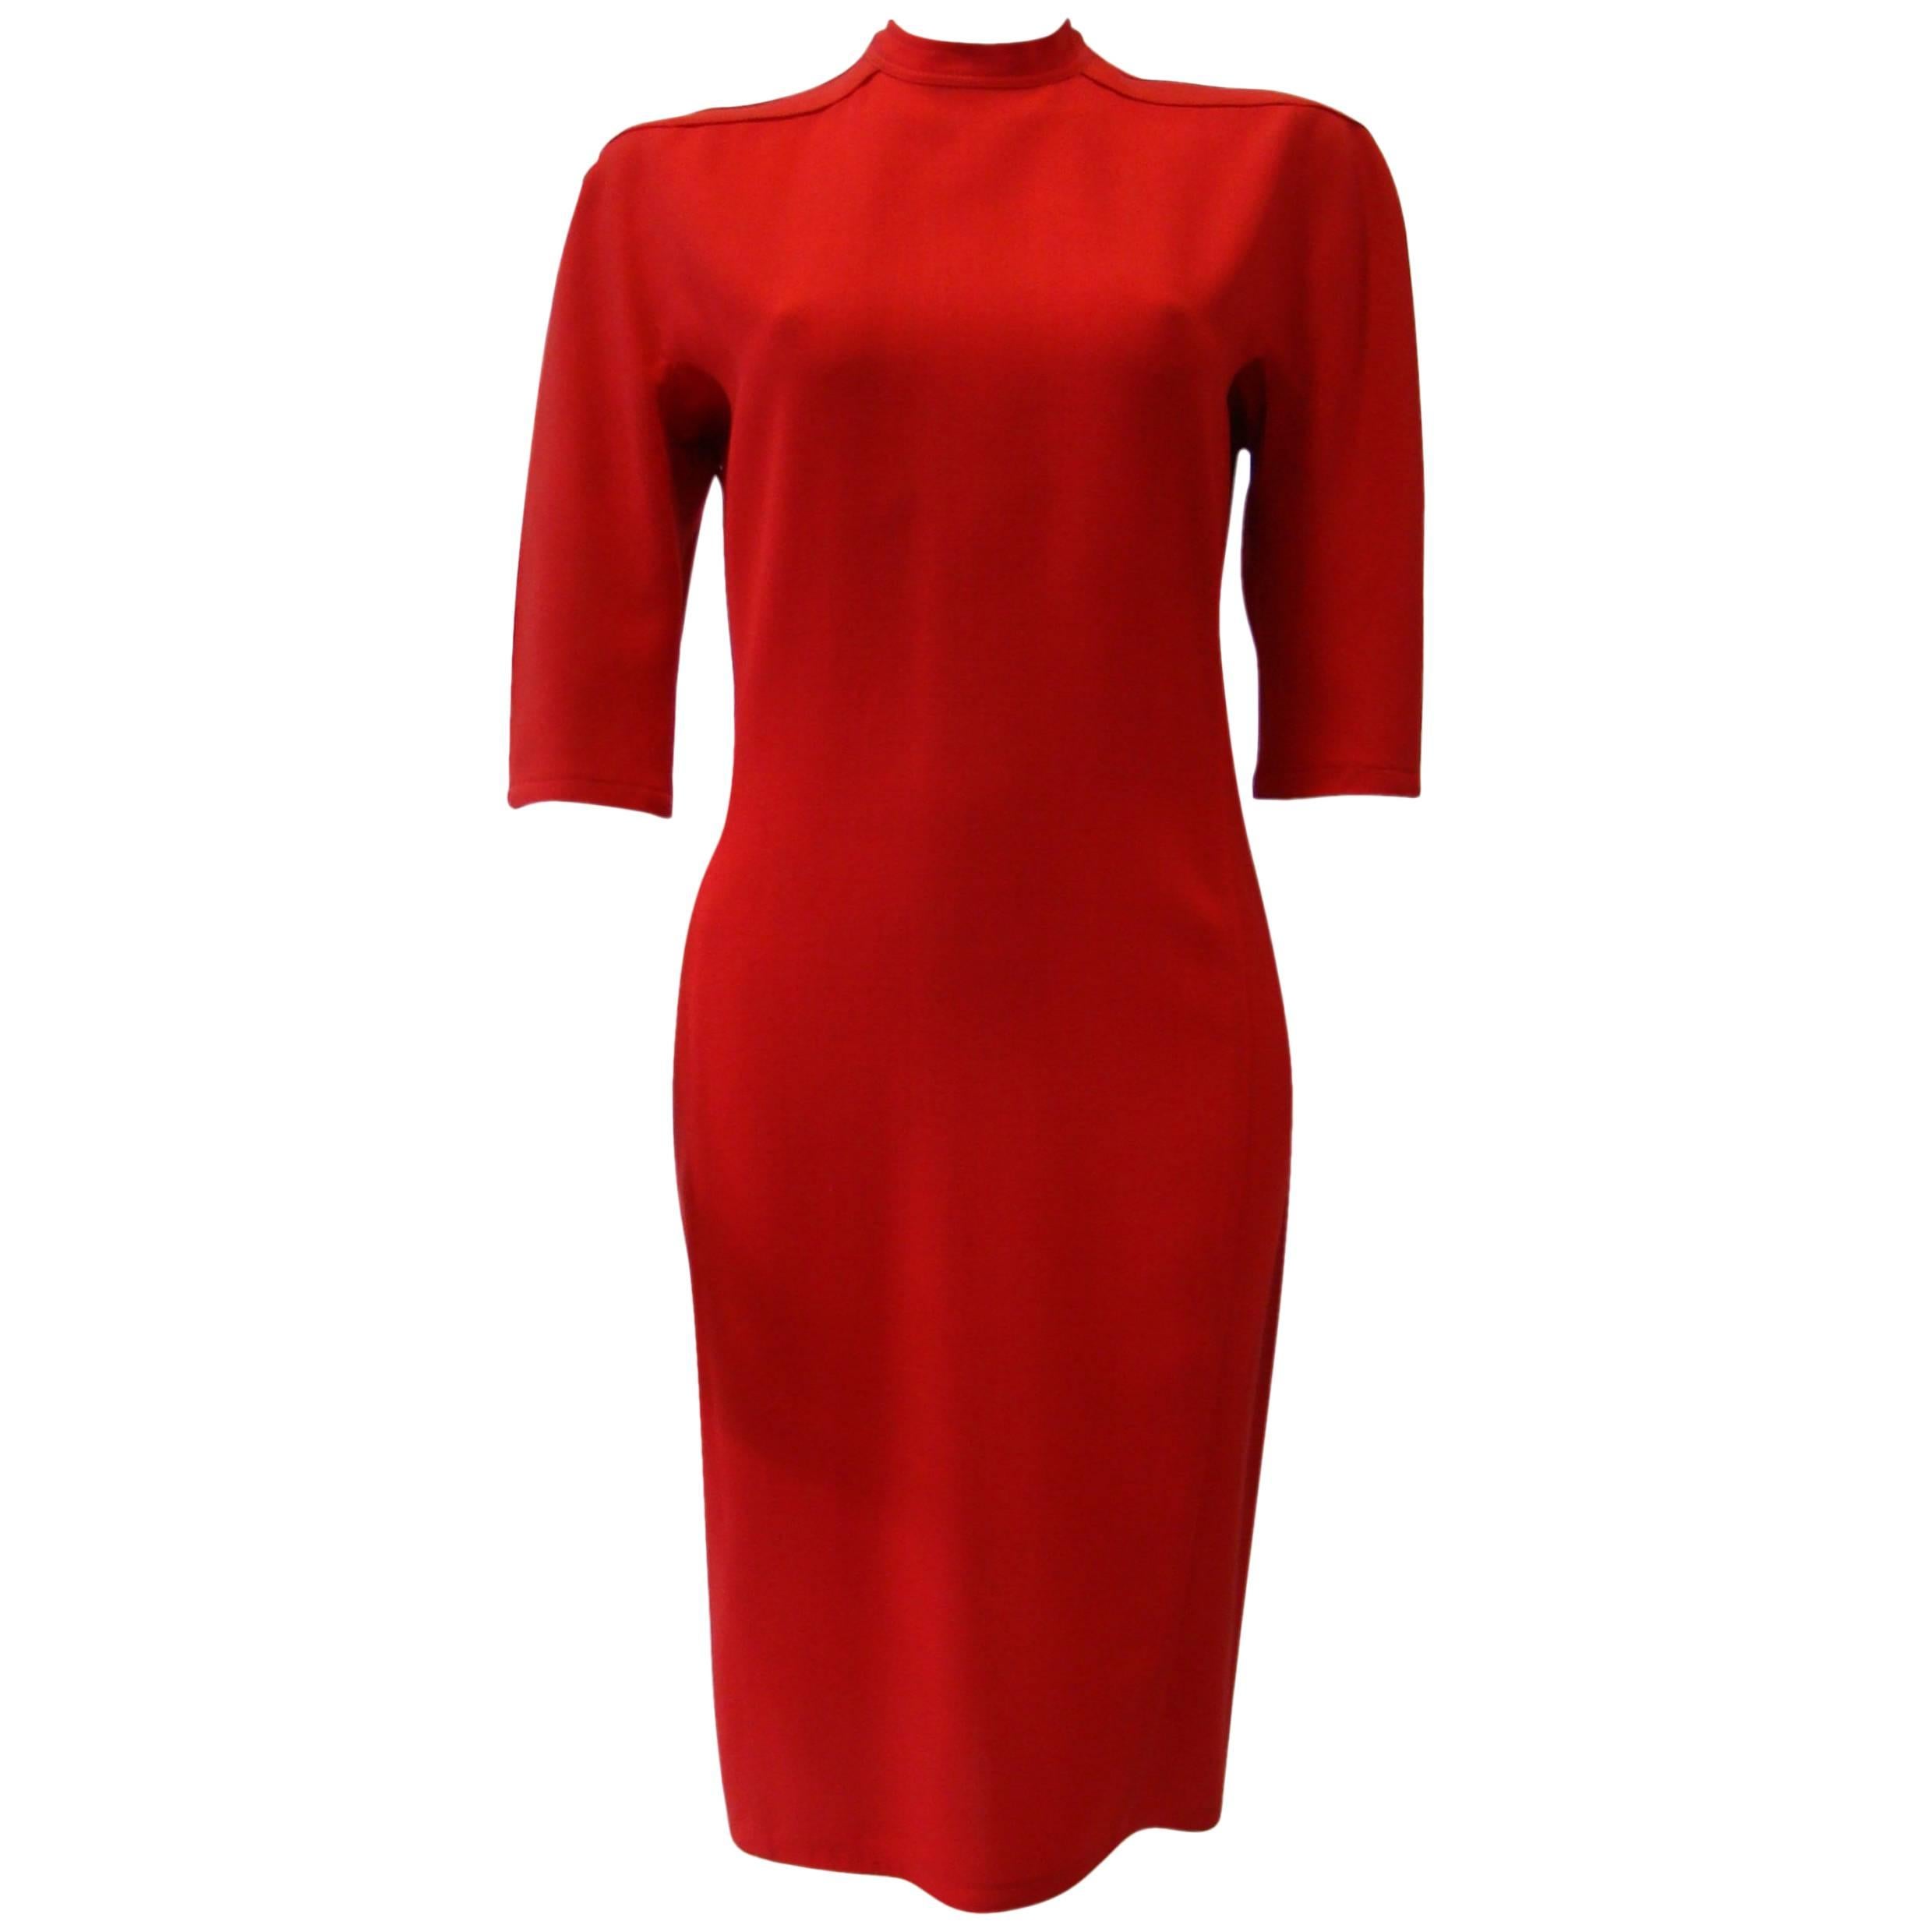 Rare Gianni Versace Red Dress  For Sale